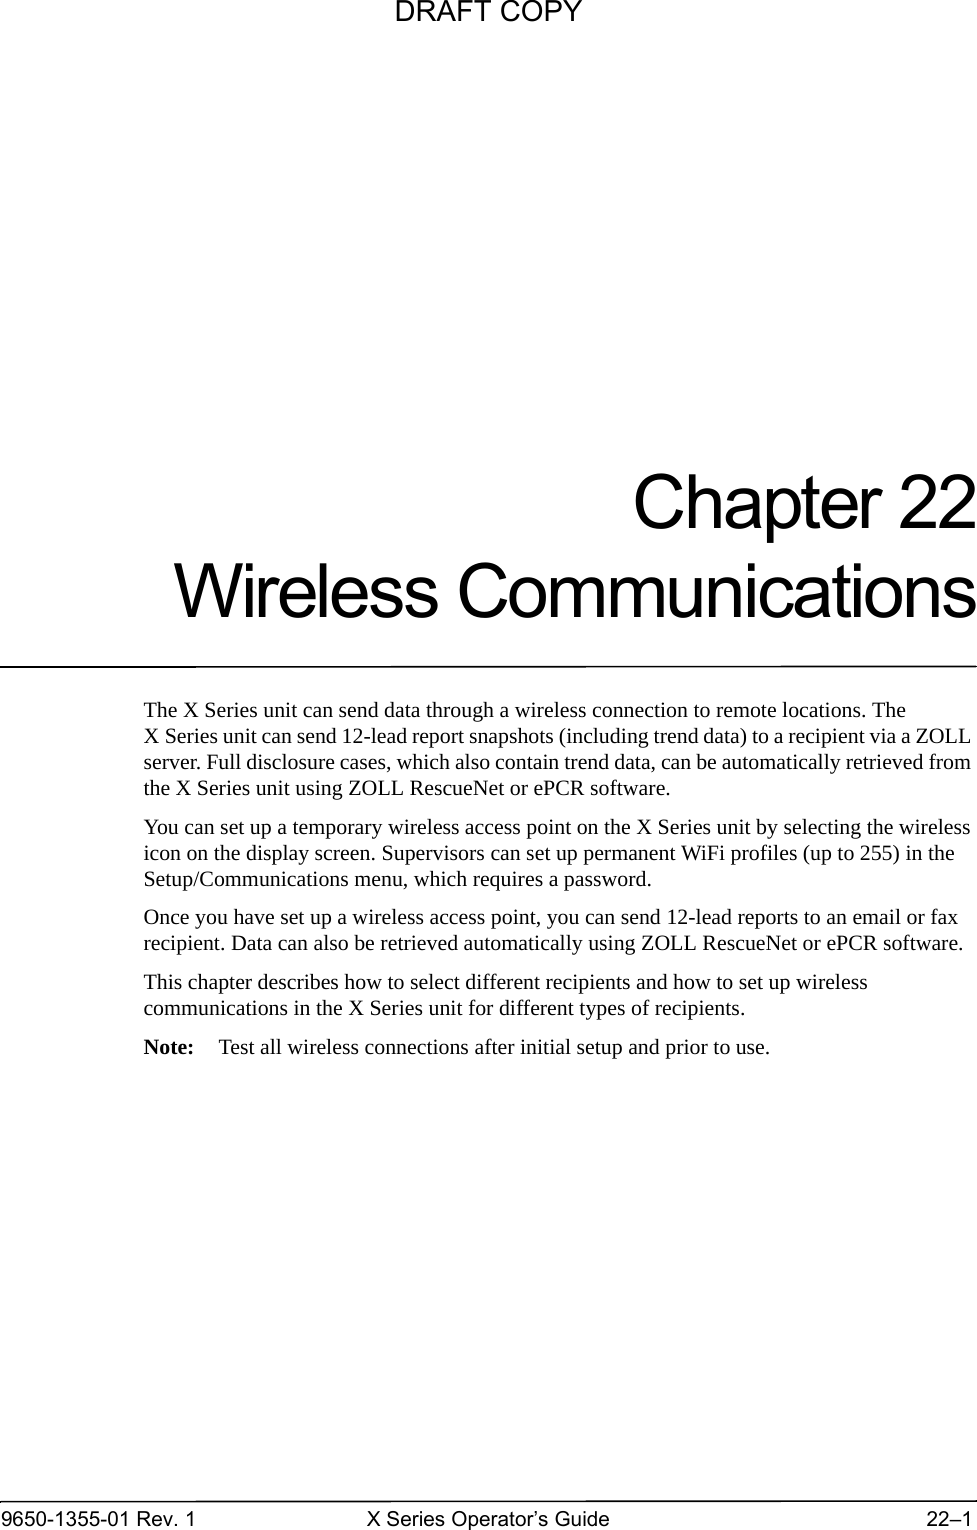 9650-1355-01 Rev. 1 X Series Operator’s Guide 22–1Chapter 22Wireless CommunicationsThe X Series unit can send data through a wireless connection to remote locations. The X Series unit can send 12-lead report snapshots (including trend data) to a recipient via a ZOLL server. Full disclosure cases, which also contain trend data, can be automatically retrieved from the X Series unit using ZOLL RescueNet or ePCR software. You can set up a temporary wireless access point on the X Series unit by selecting the wireless icon on the display screen. Supervisors can set up permanent WiFi profiles (up to 255) in the Setup/Communications menu, which requires a password.Once you have set up a wireless access point, you can send 12-lead reports to an email or fax recipient. Data can also be retrieved automatically using ZOLL RescueNet or ePCR software.This chapter describes how to select different recipients and how to set up wireless communications in the X Series unit for different types of recipients. Note: Test all wireless connections after initial setup and prior to use.DRAFT COPY